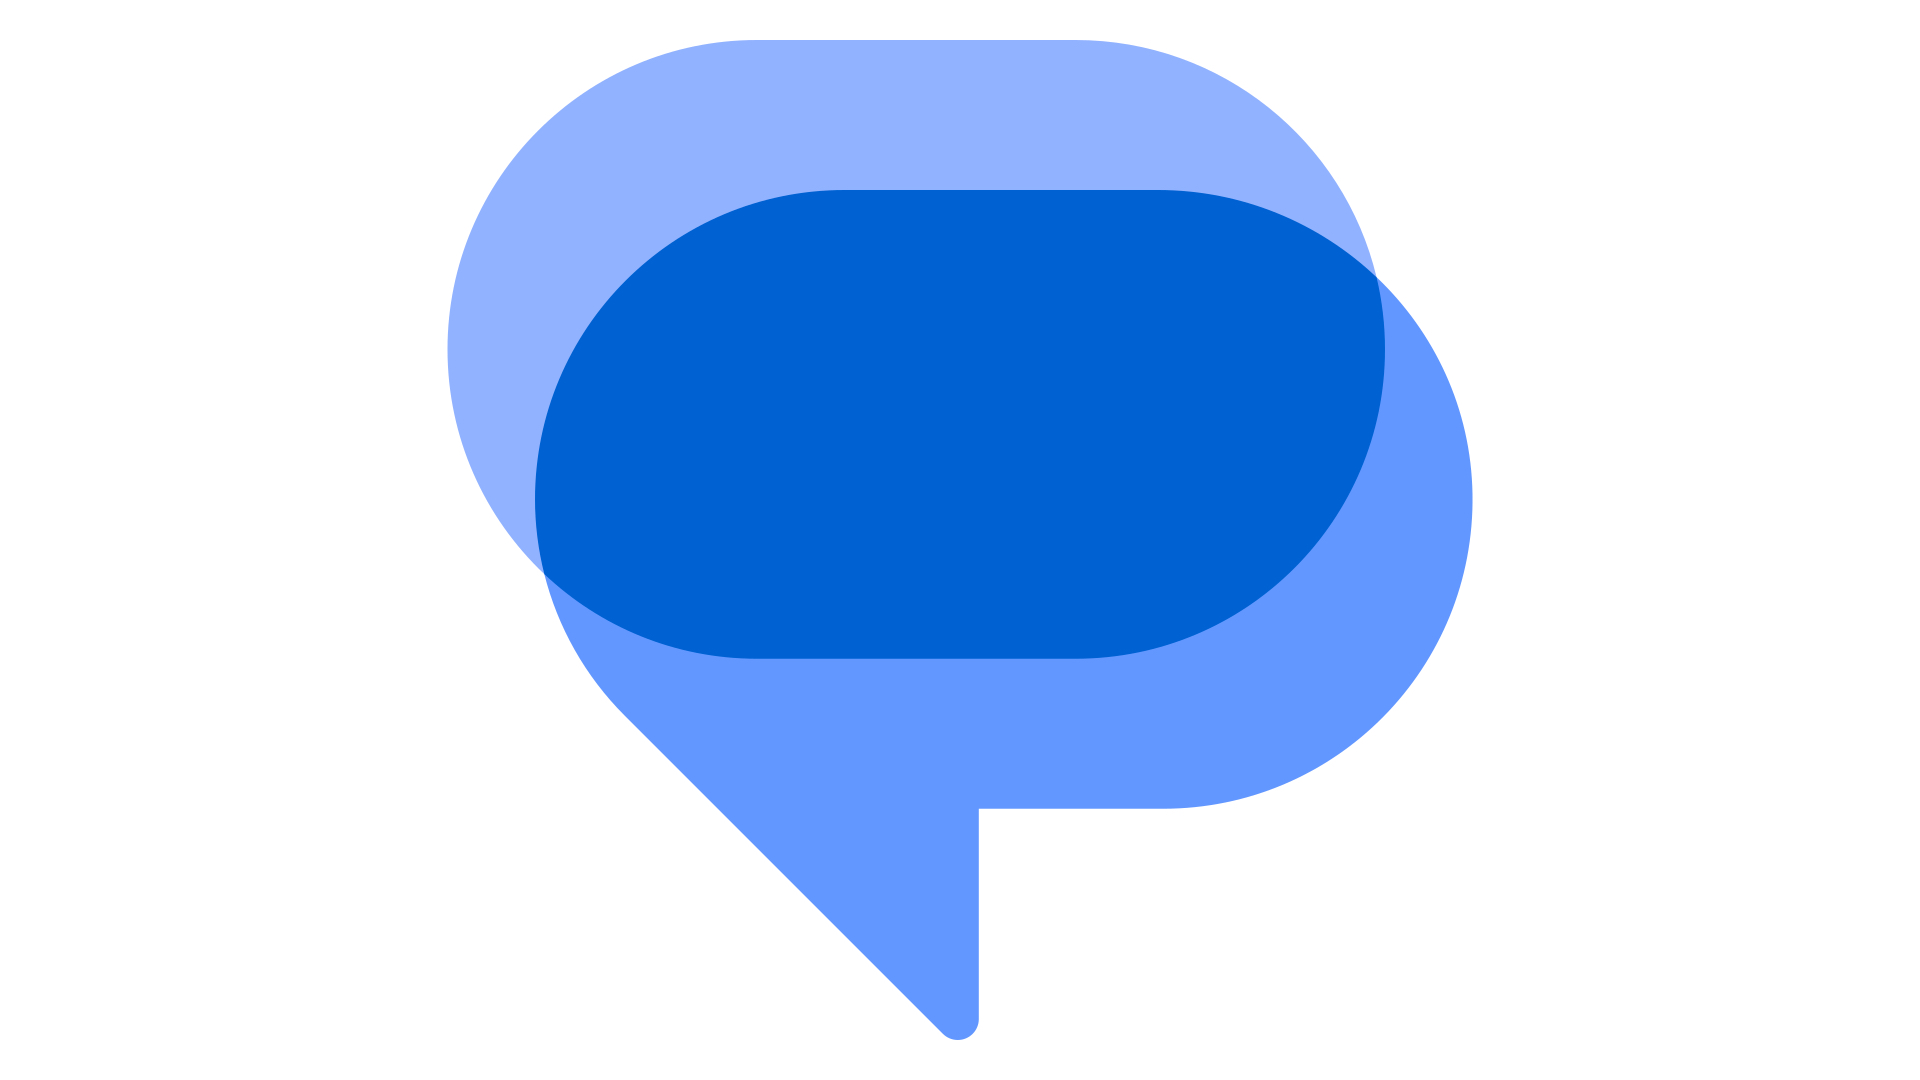 Google Messages will soon let you react to messages with any emoji - SamMobile - Samsung news